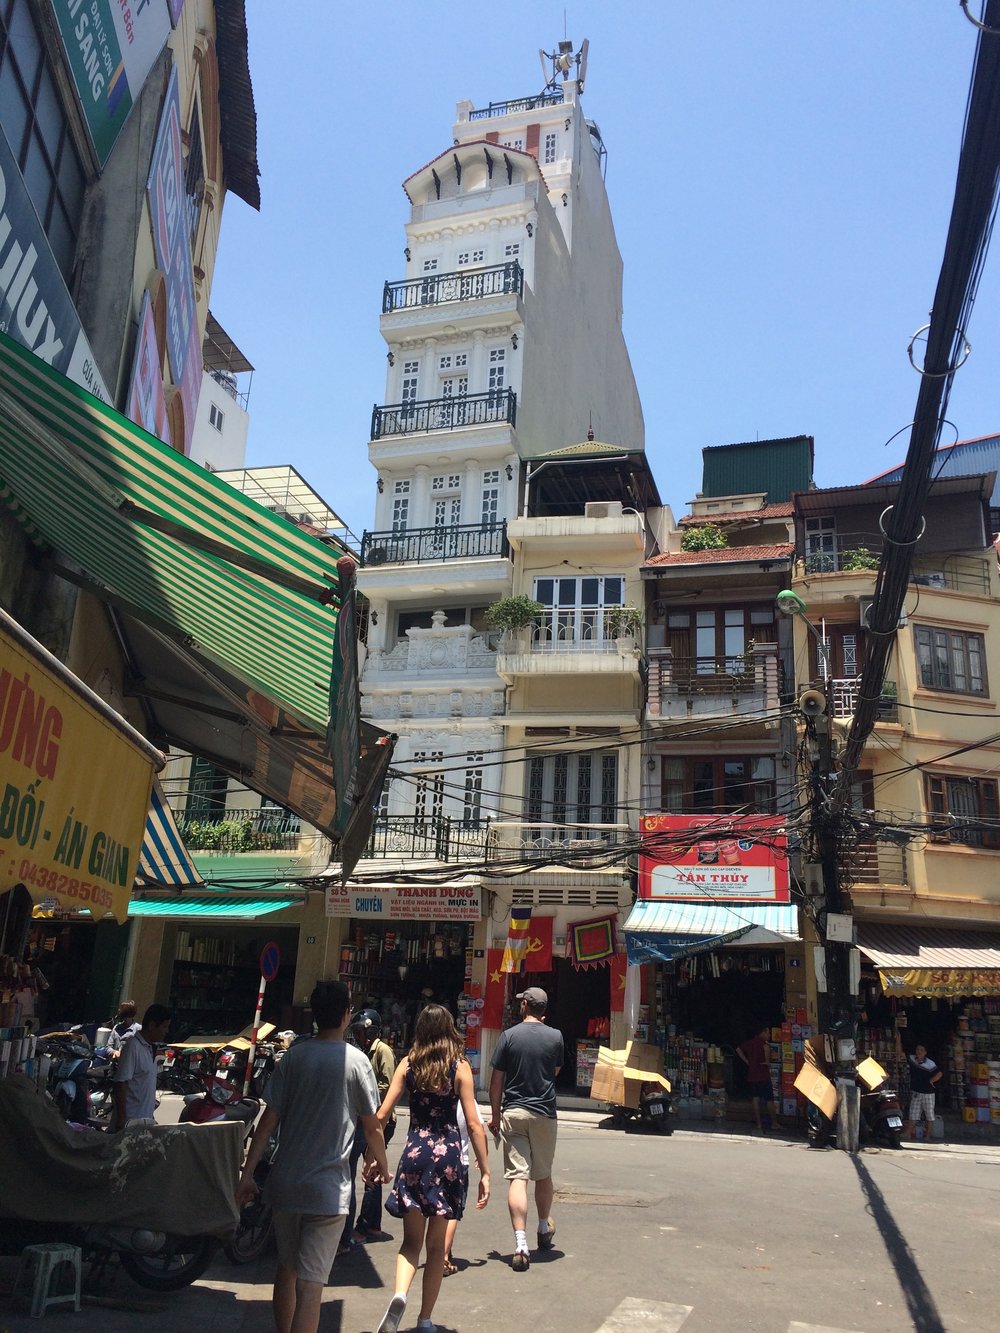 Why are buildings so tall and skinny in Hanoi?